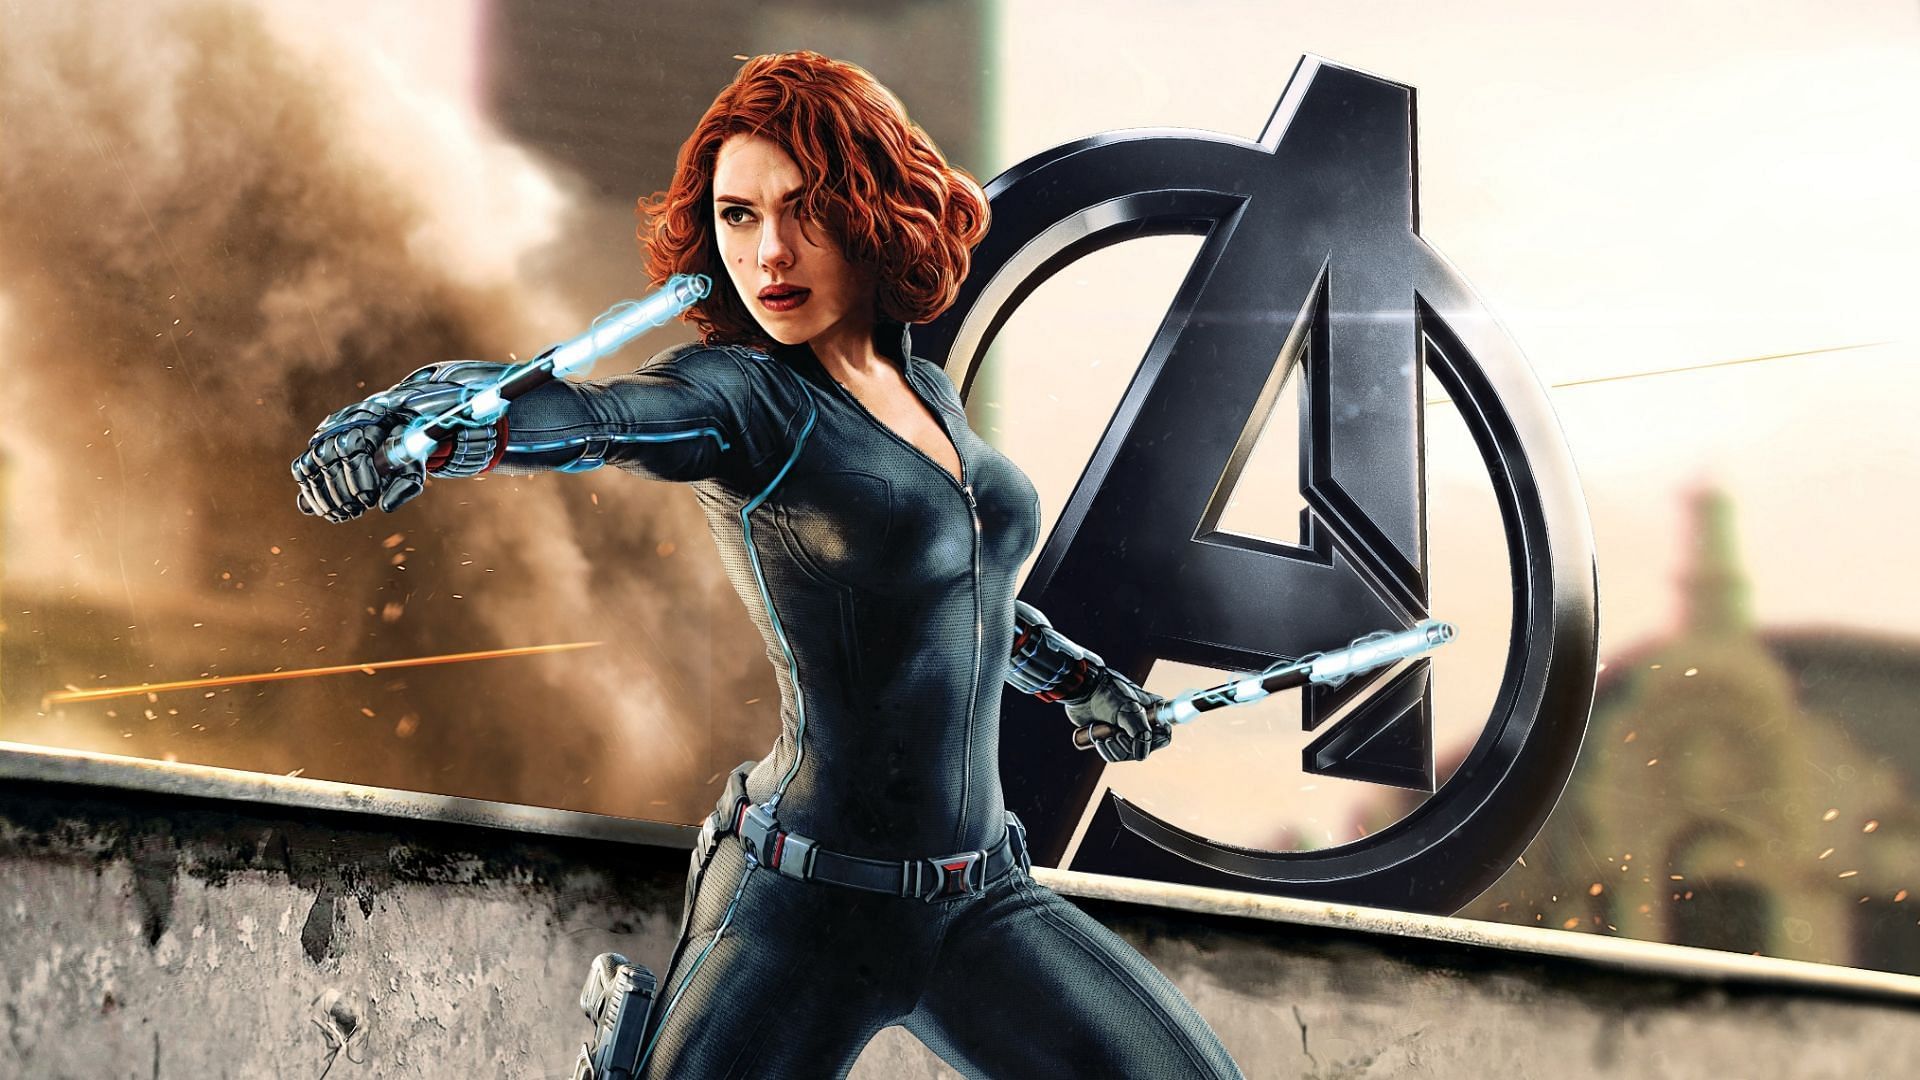 Natasha Romanoff was known as a master assassin and one of the world&#039;s deadliest spies. (Image via Marvel)